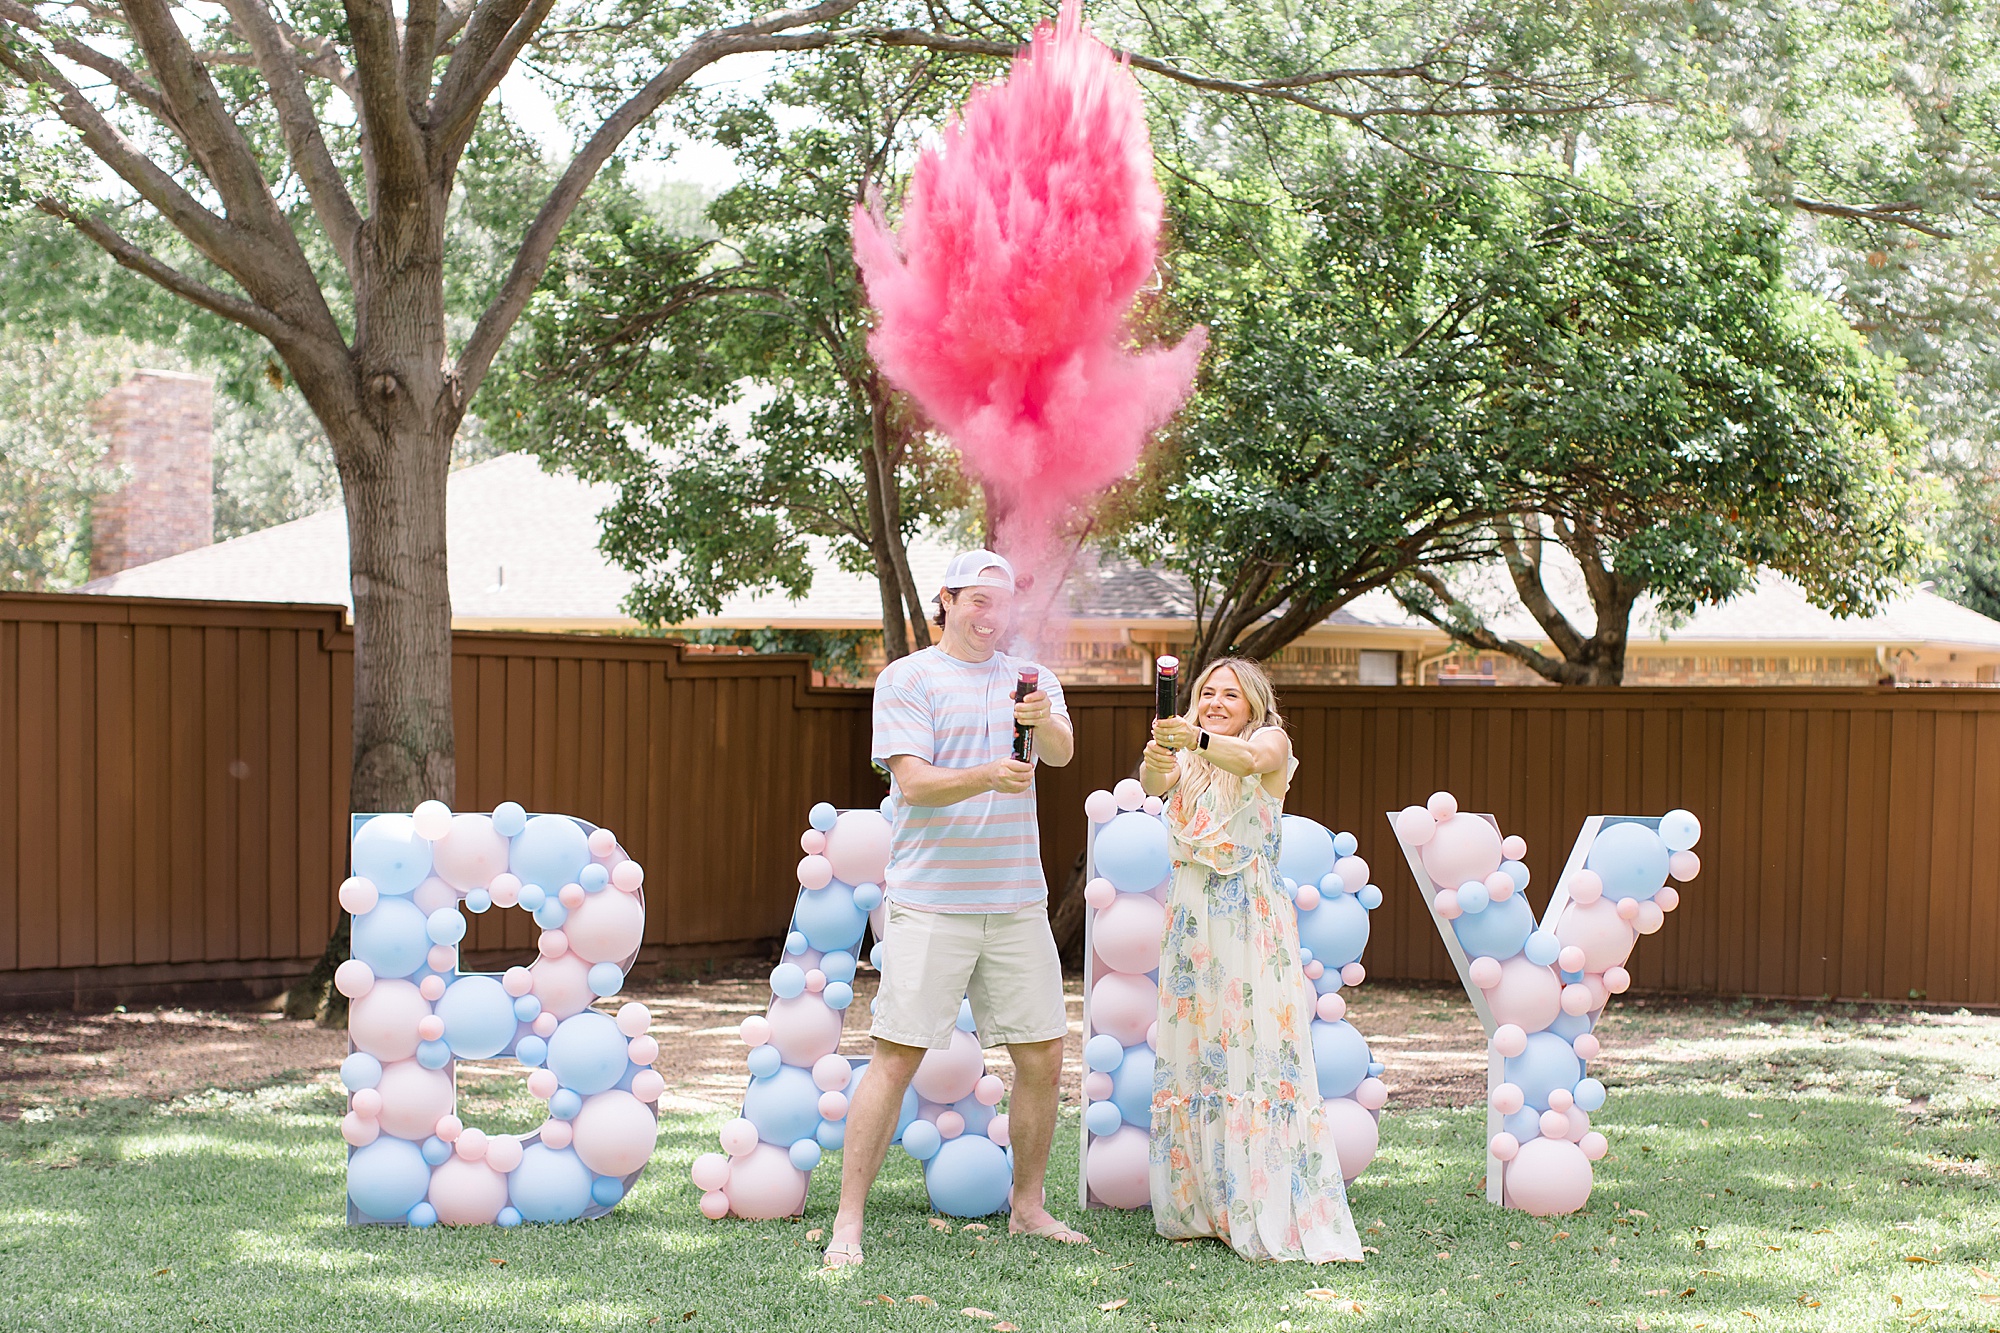 parents pop confetti cannon with pink smoke during Texas gender reveal party